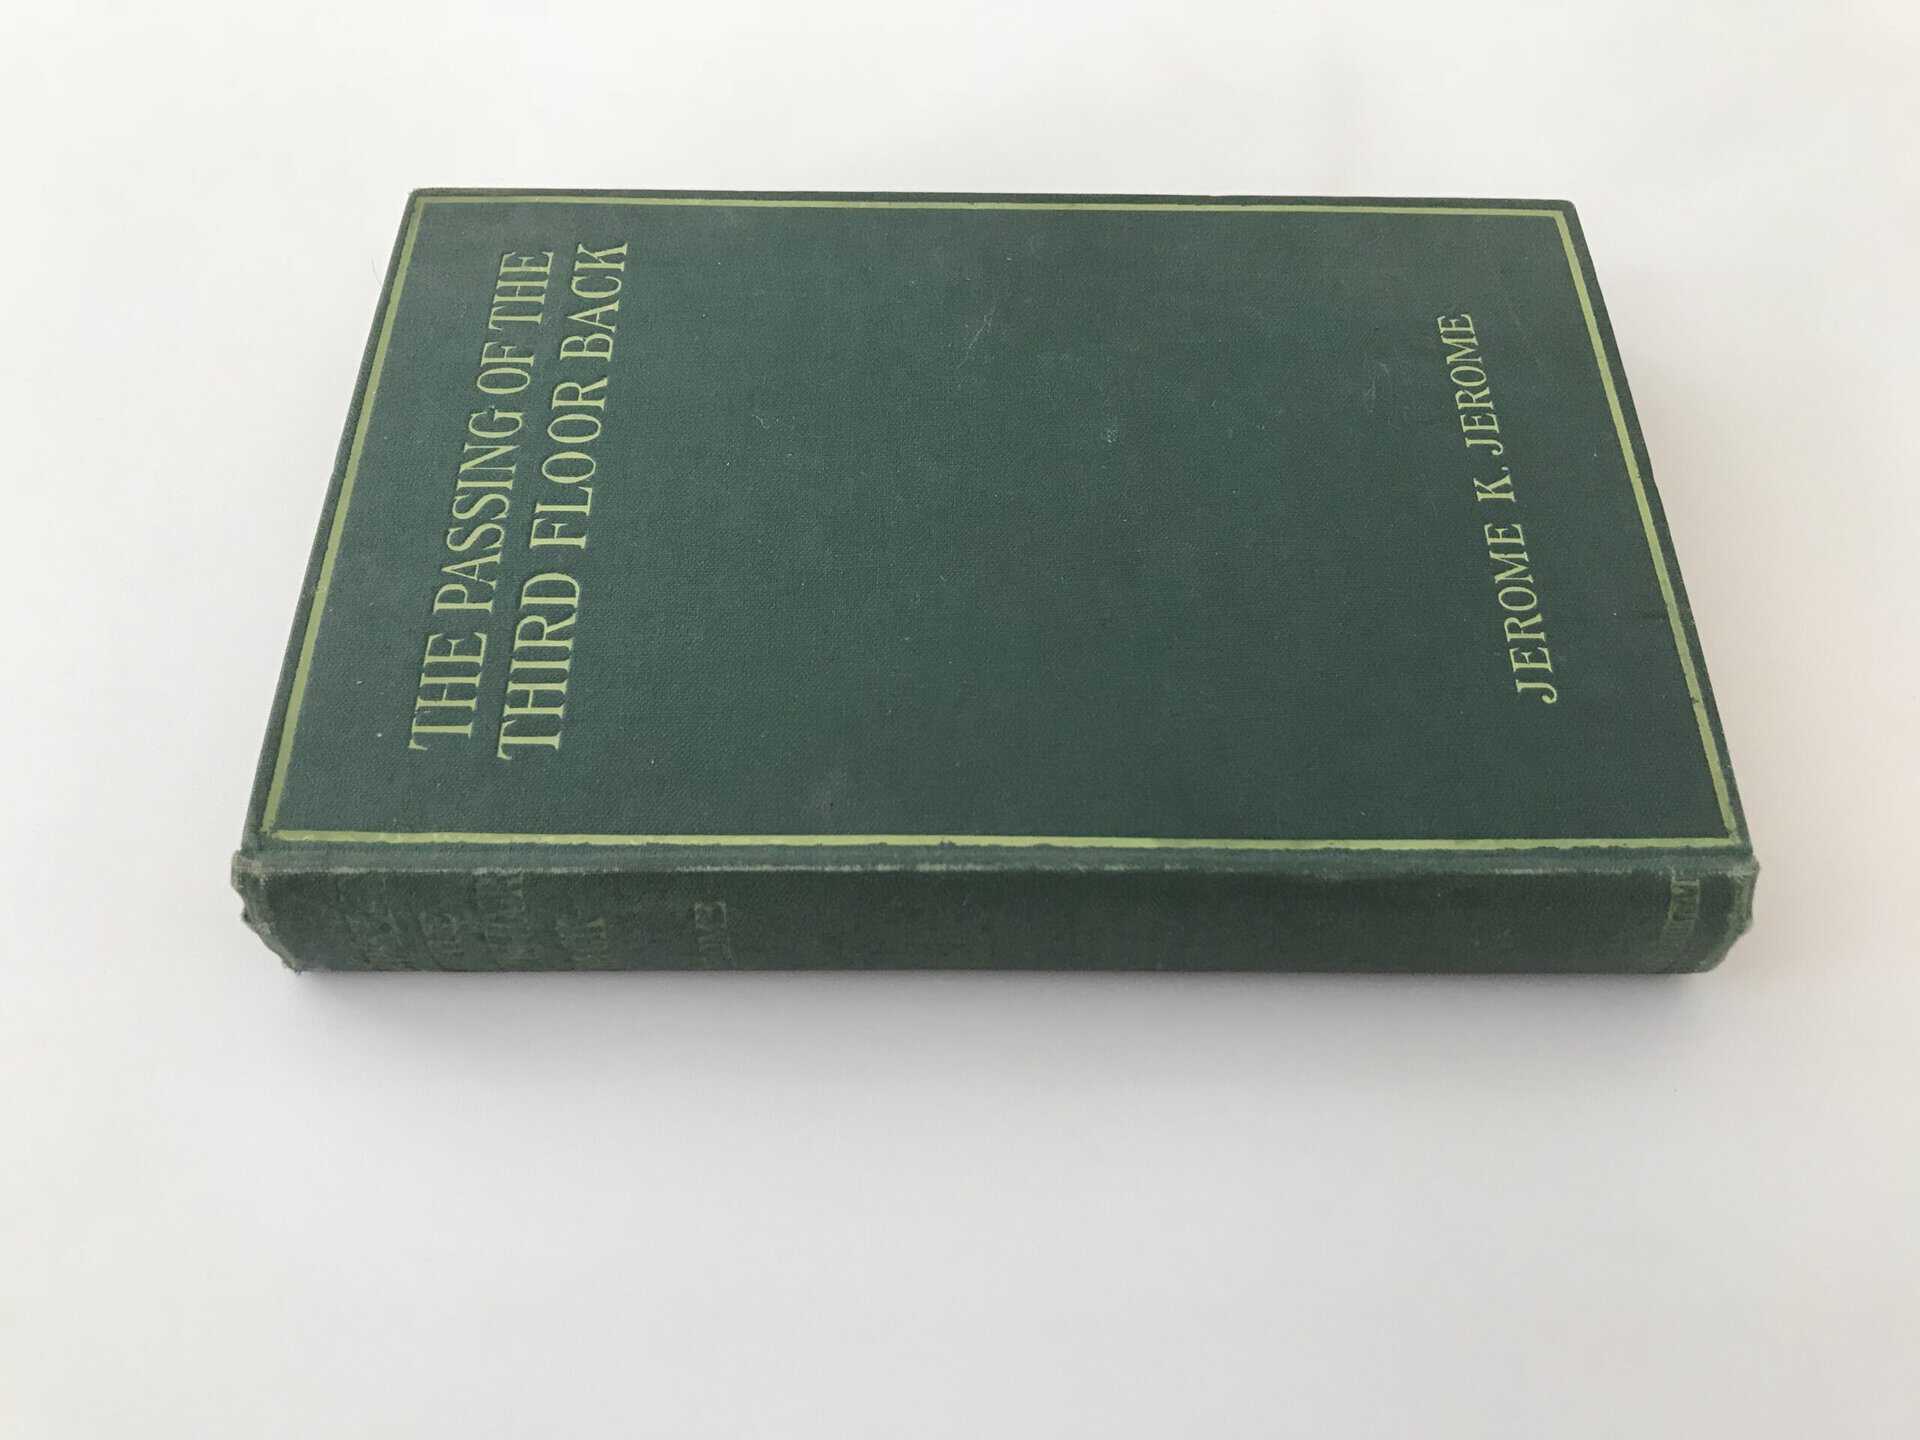 jerome k jerome the passing of the third floor back first edition3